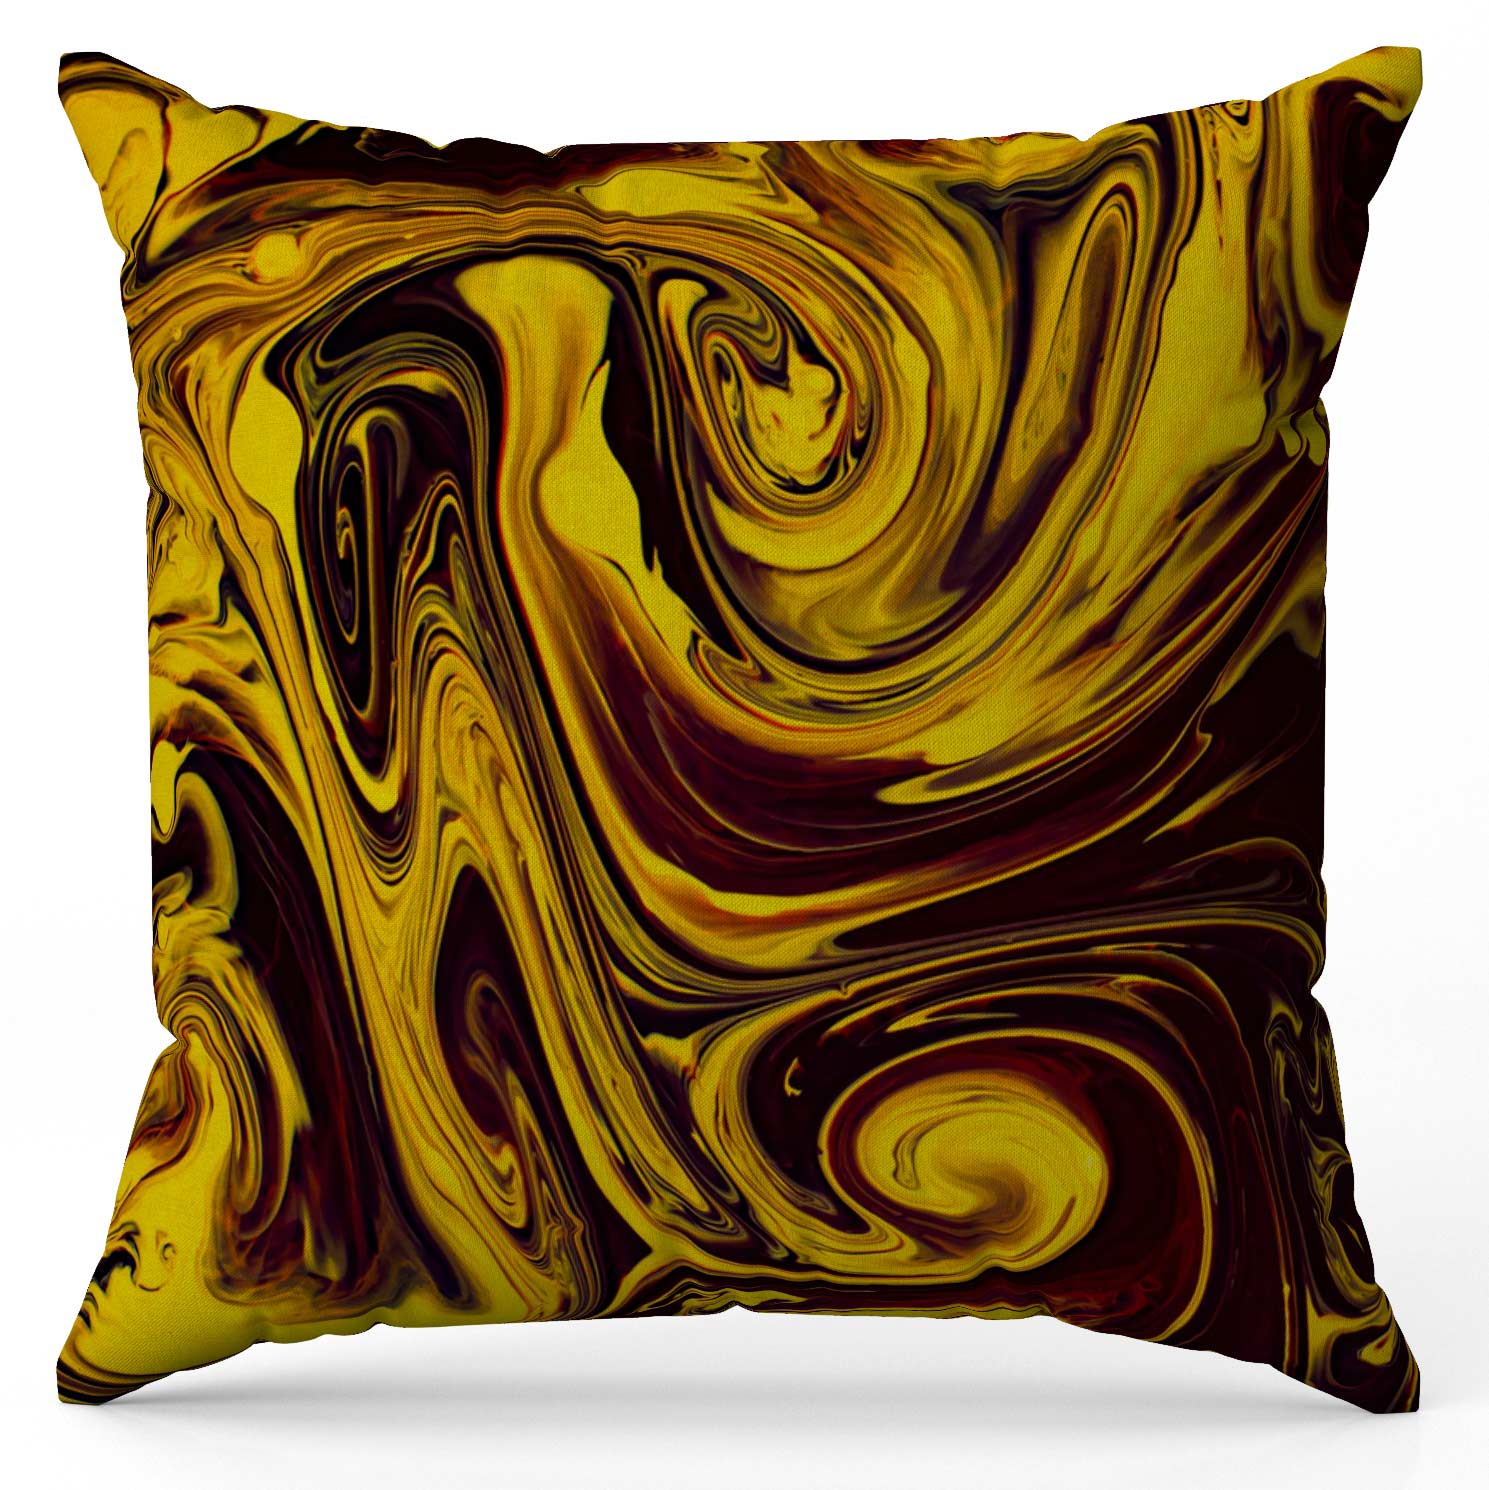 Gold Zircon Marble-Stone Cushion Cover Trendy Home